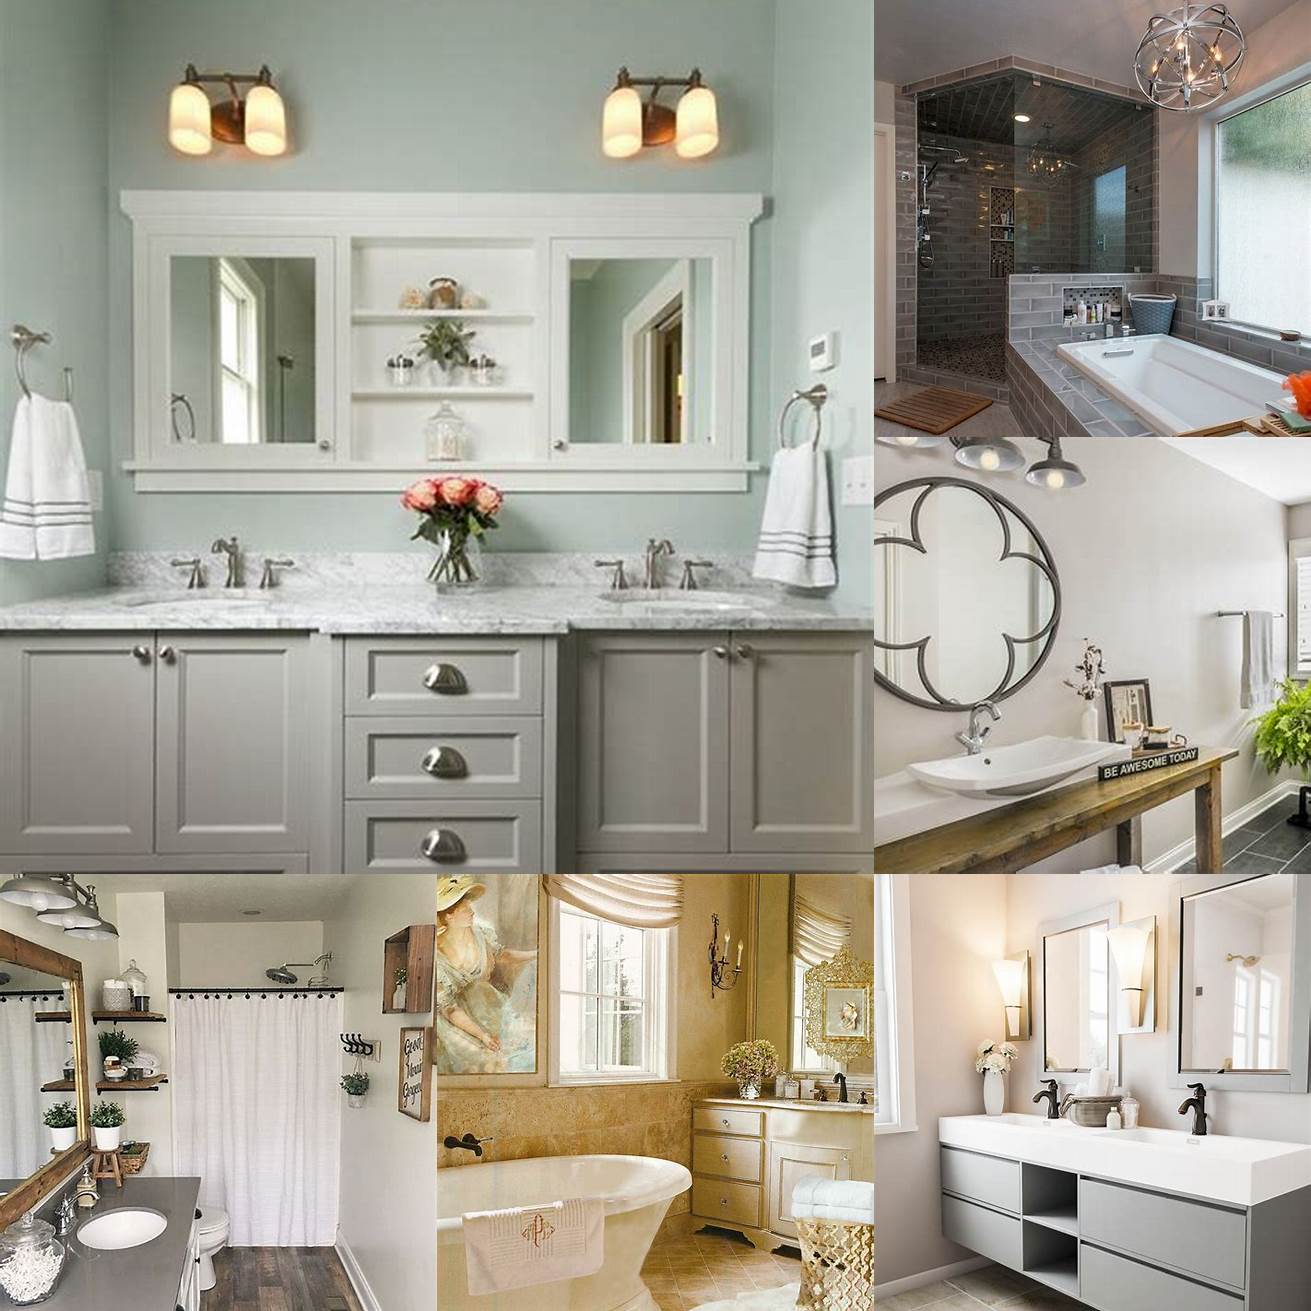 Choose a style that complements your bathroom décor and personal taste